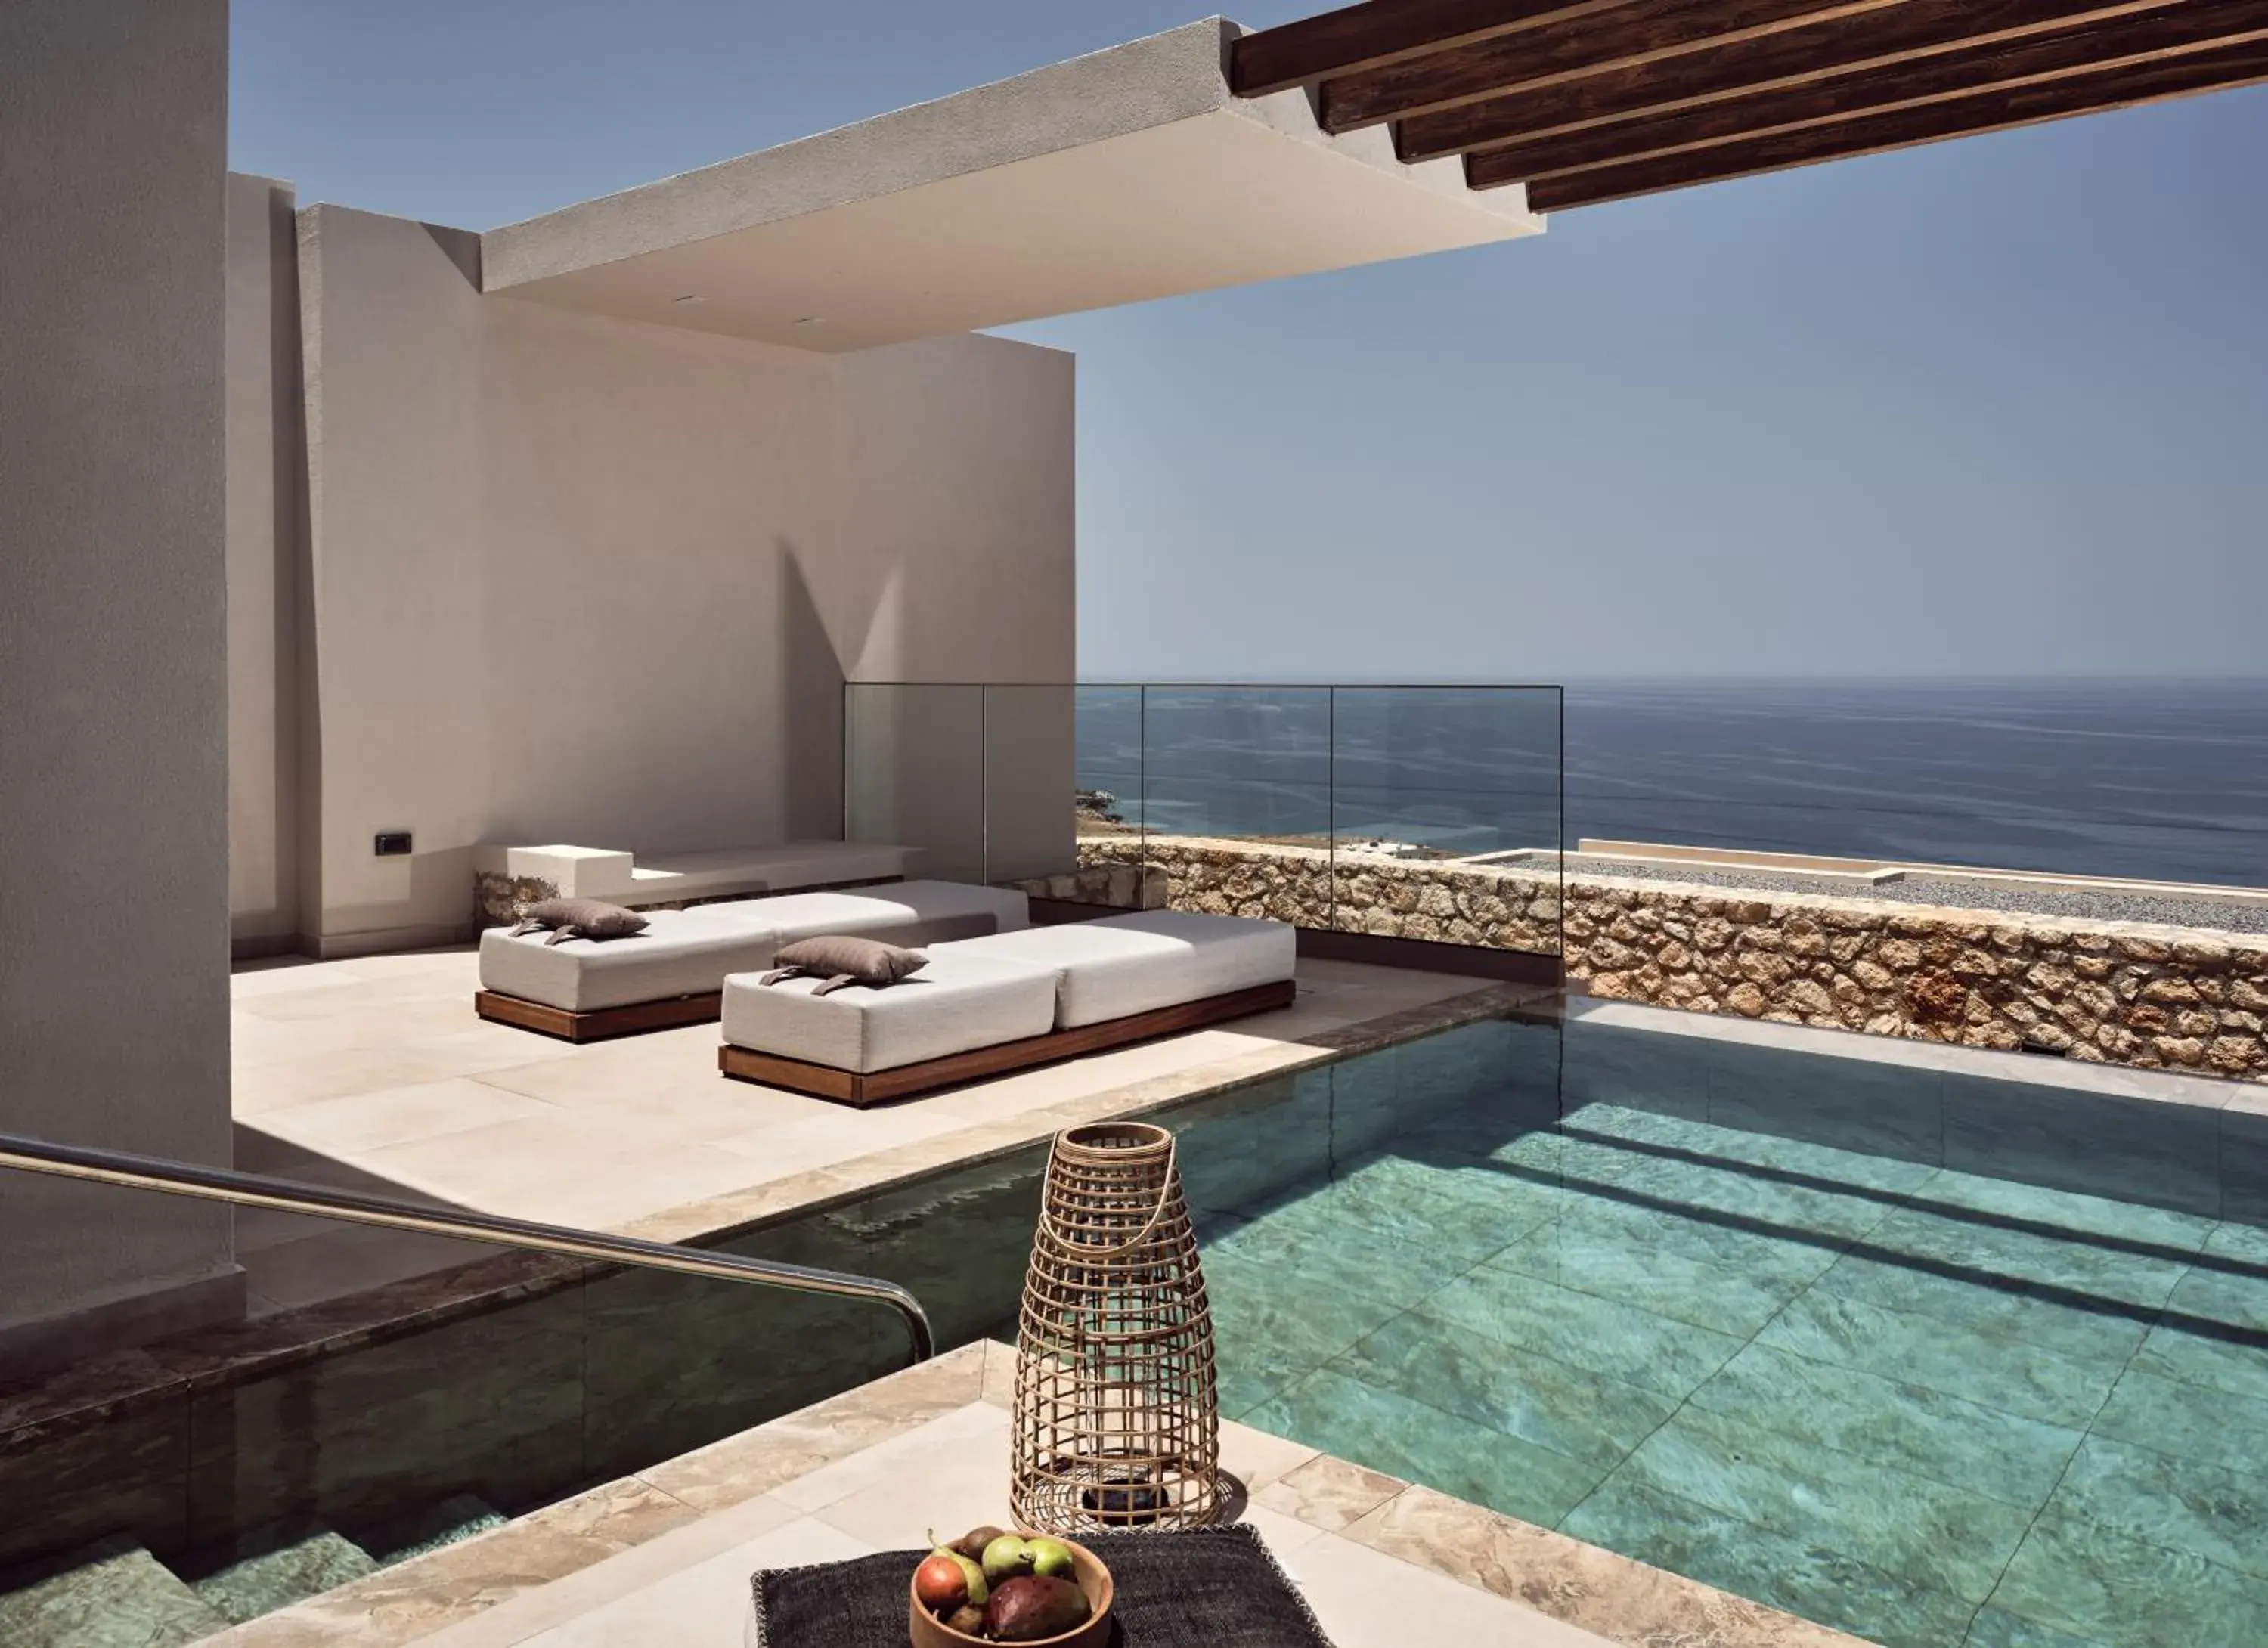 Swimming pool in The Royal Senses Resort Crete, Curio Collection by Hilton